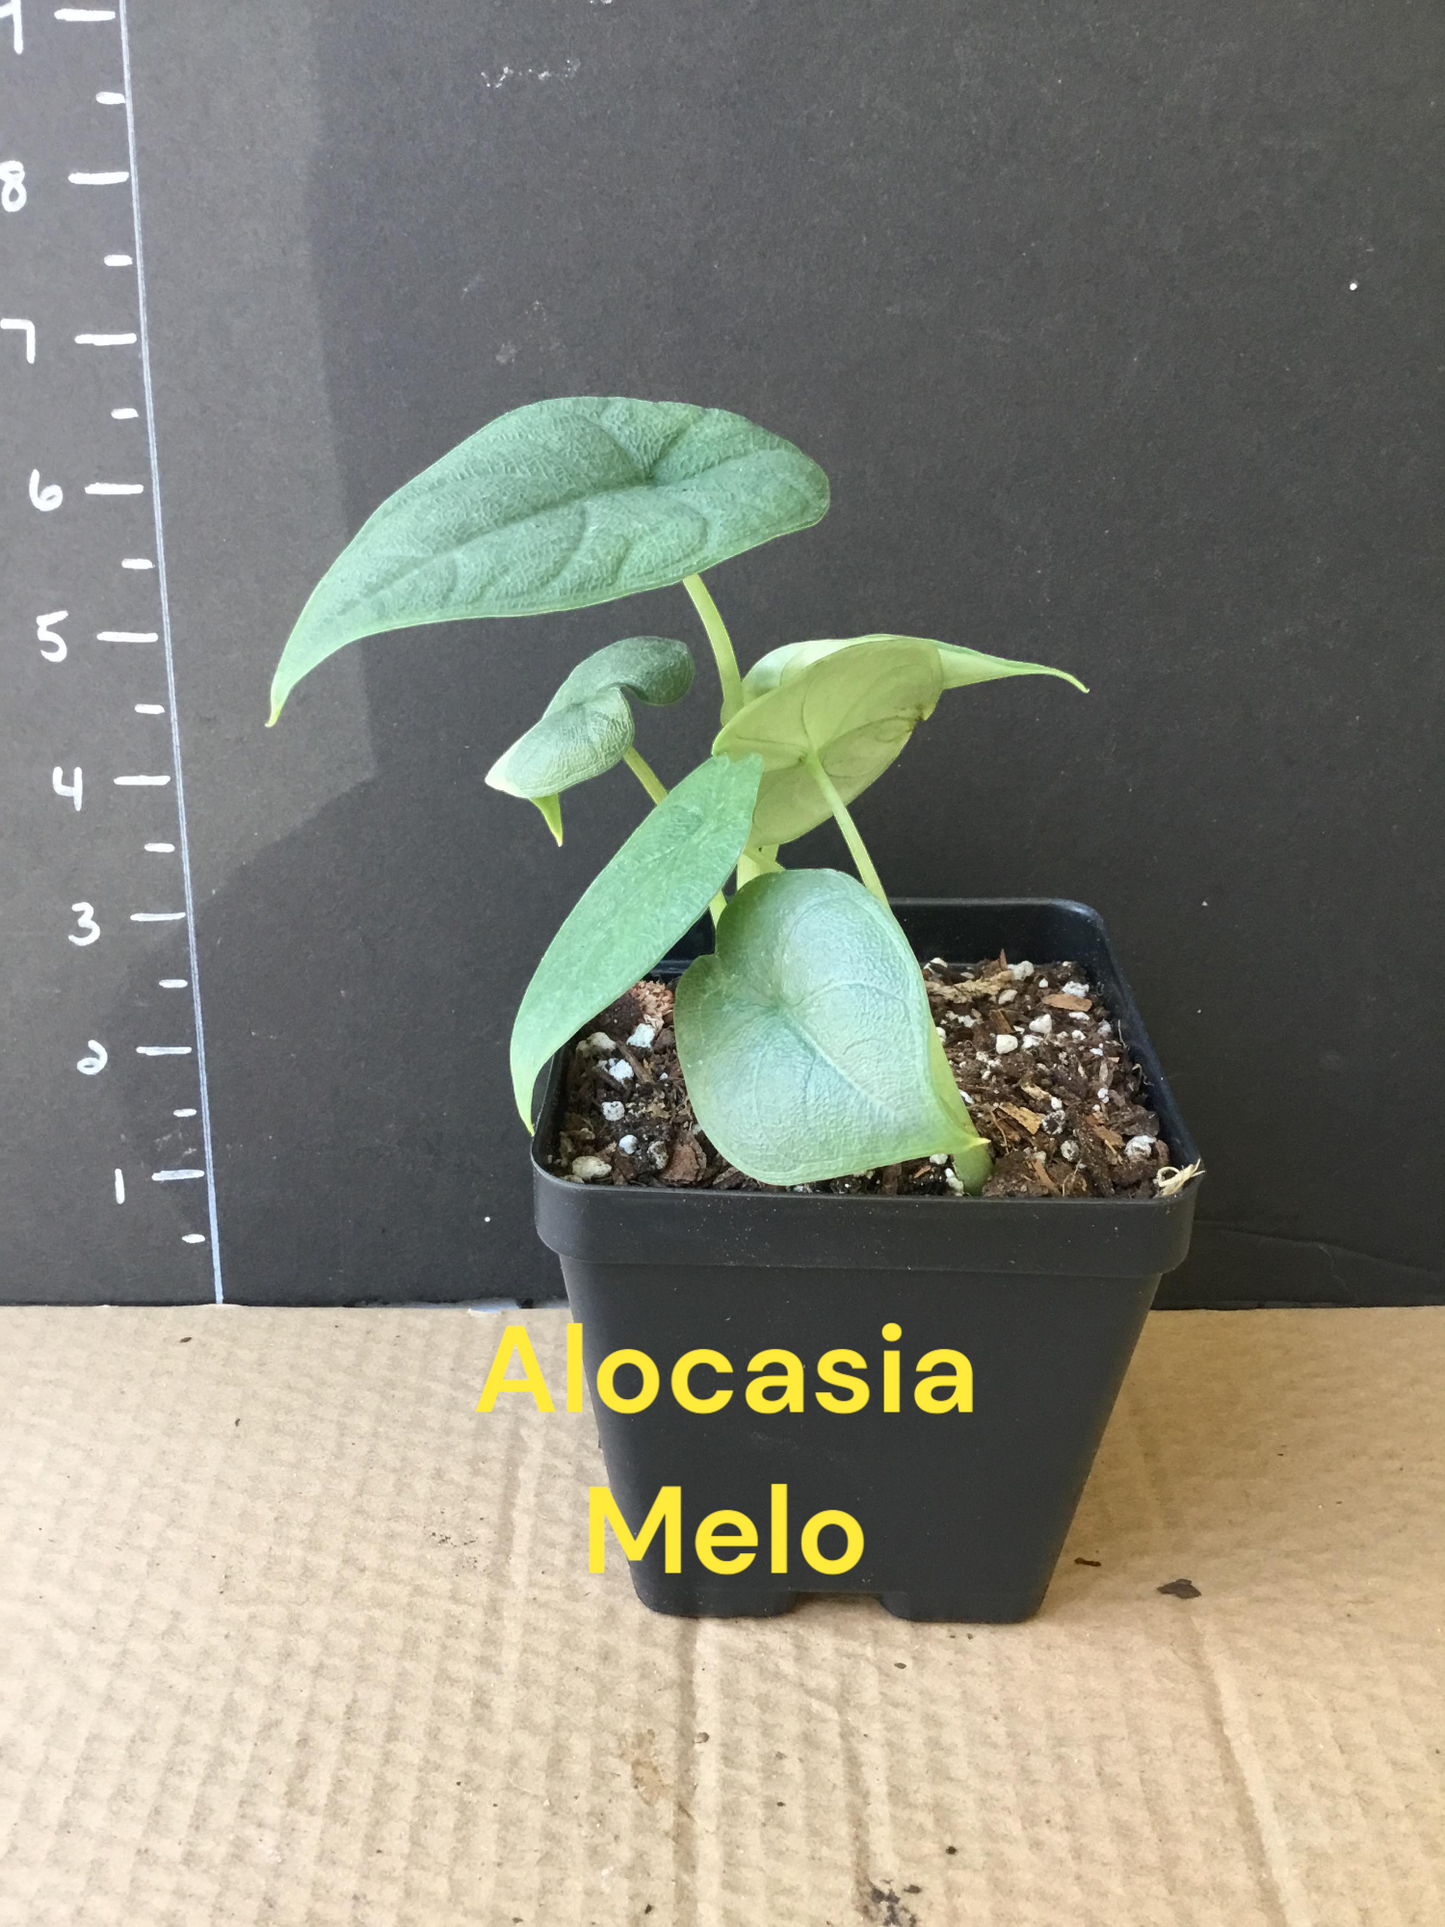 Alocasia Melo young plants two per three or four inch pot. Photos b4 shipping.